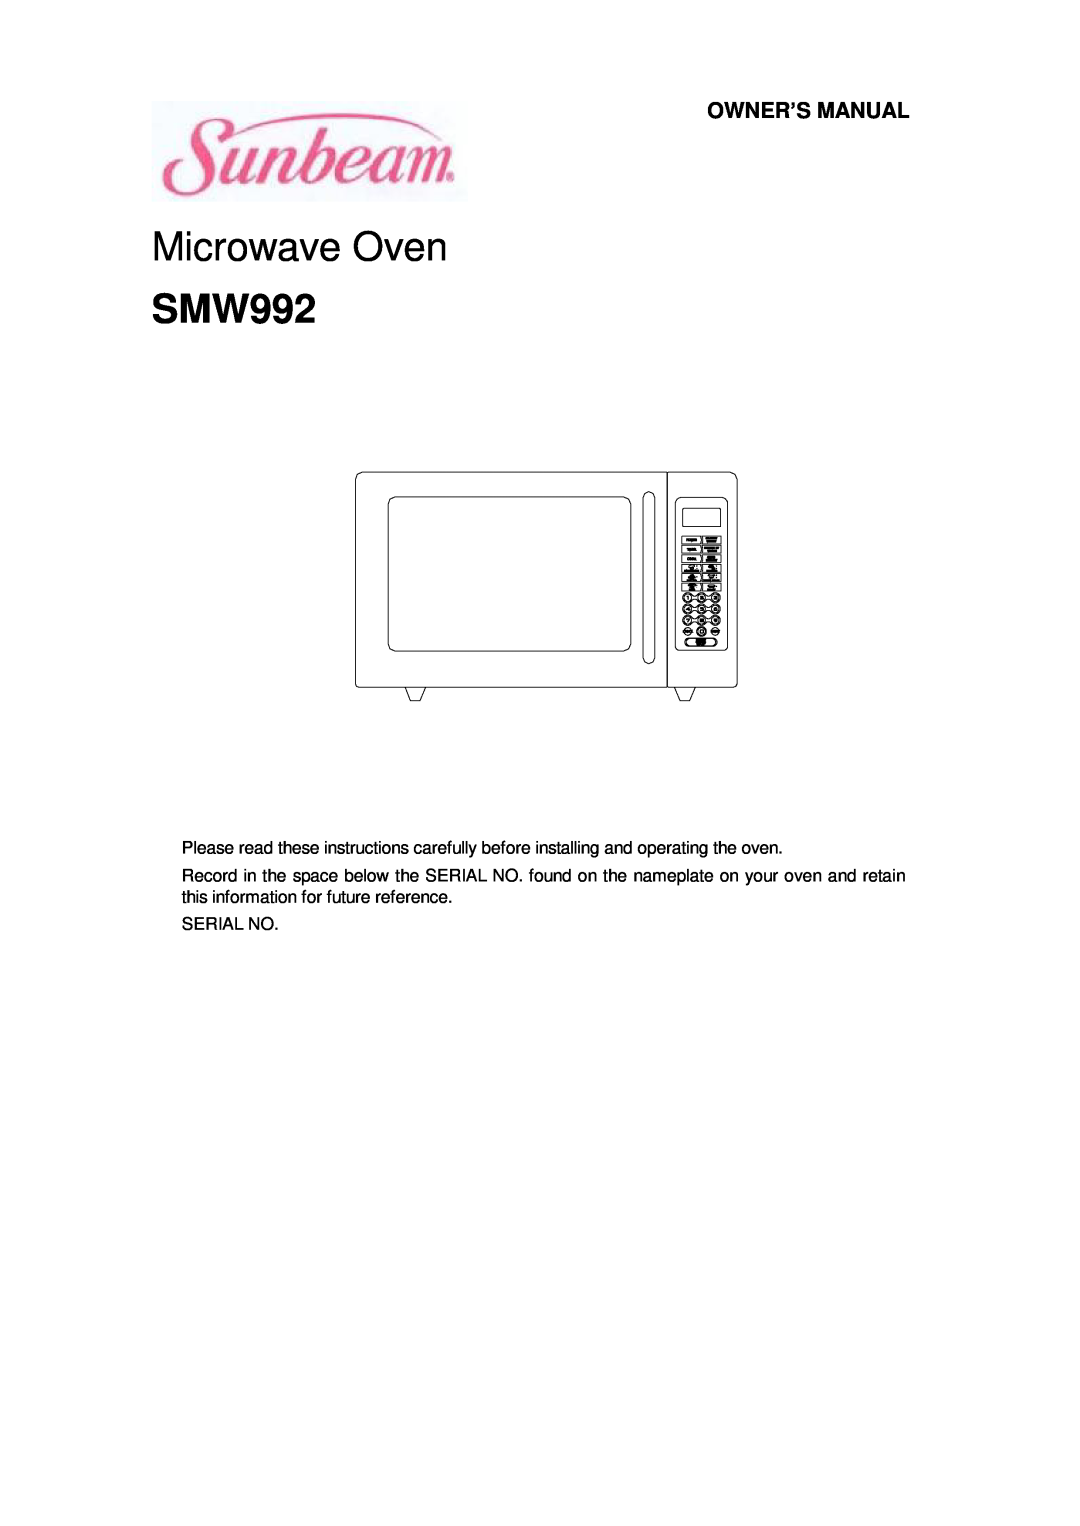 Sunbeam SMW992 owner manual Microwave Oven 